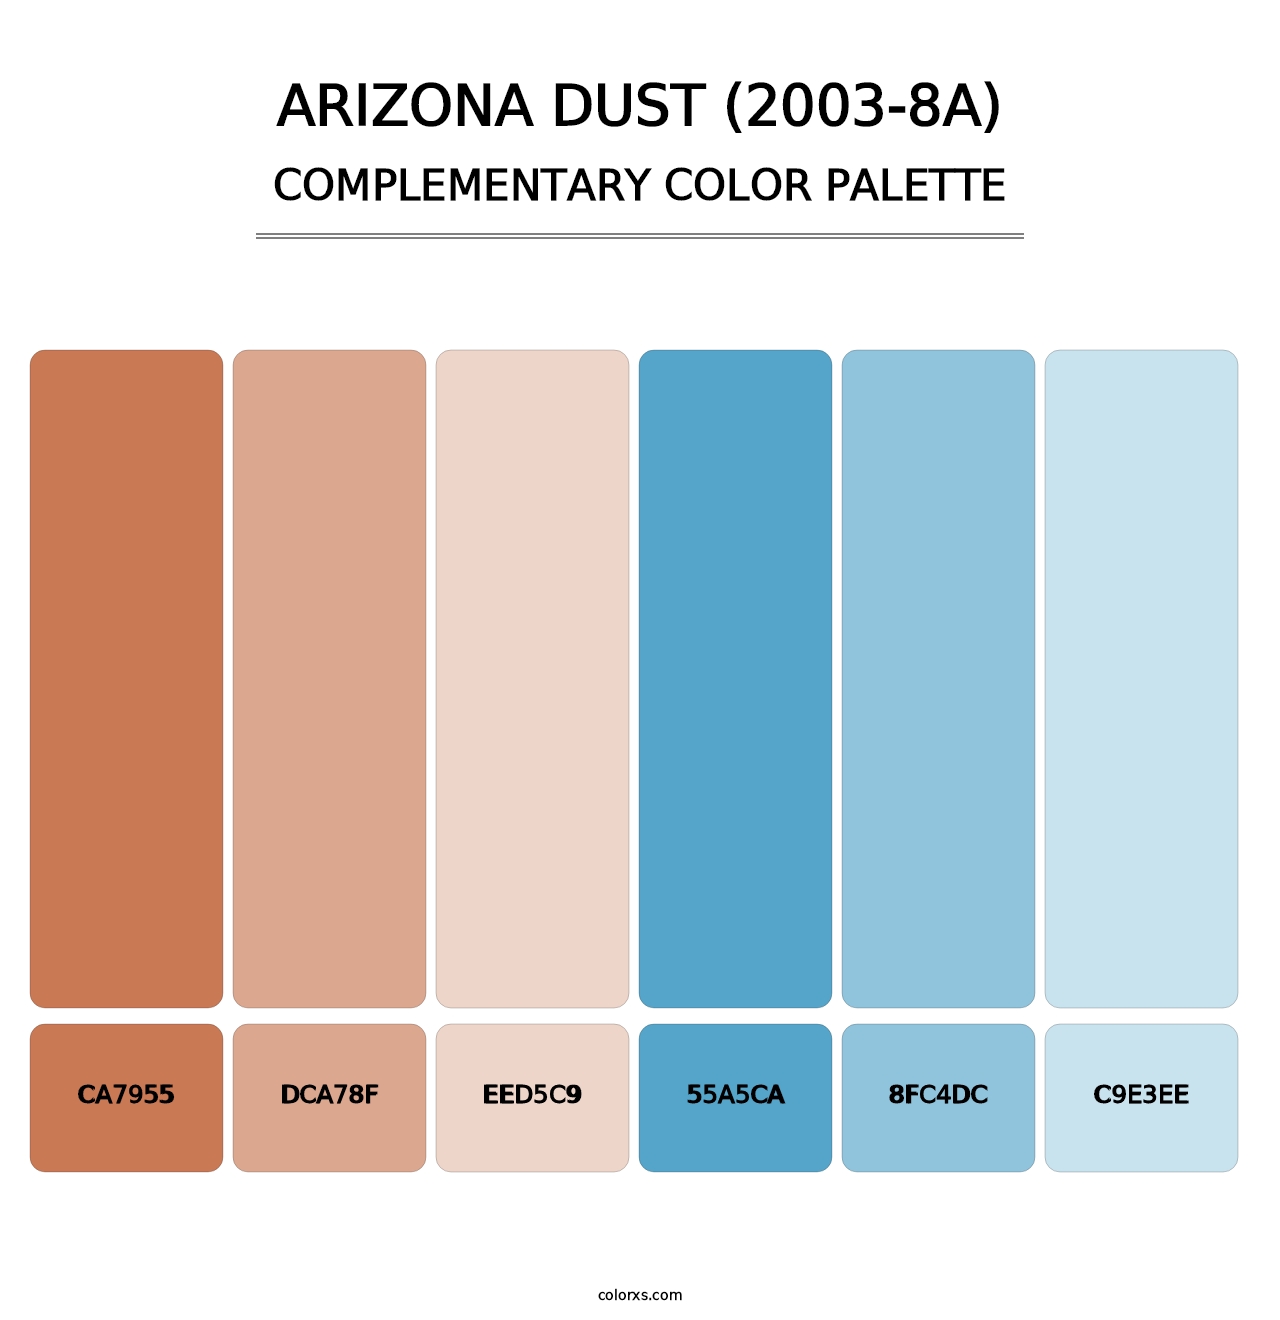 Arizona Dust (2003-8A) - Complementary Color Palette